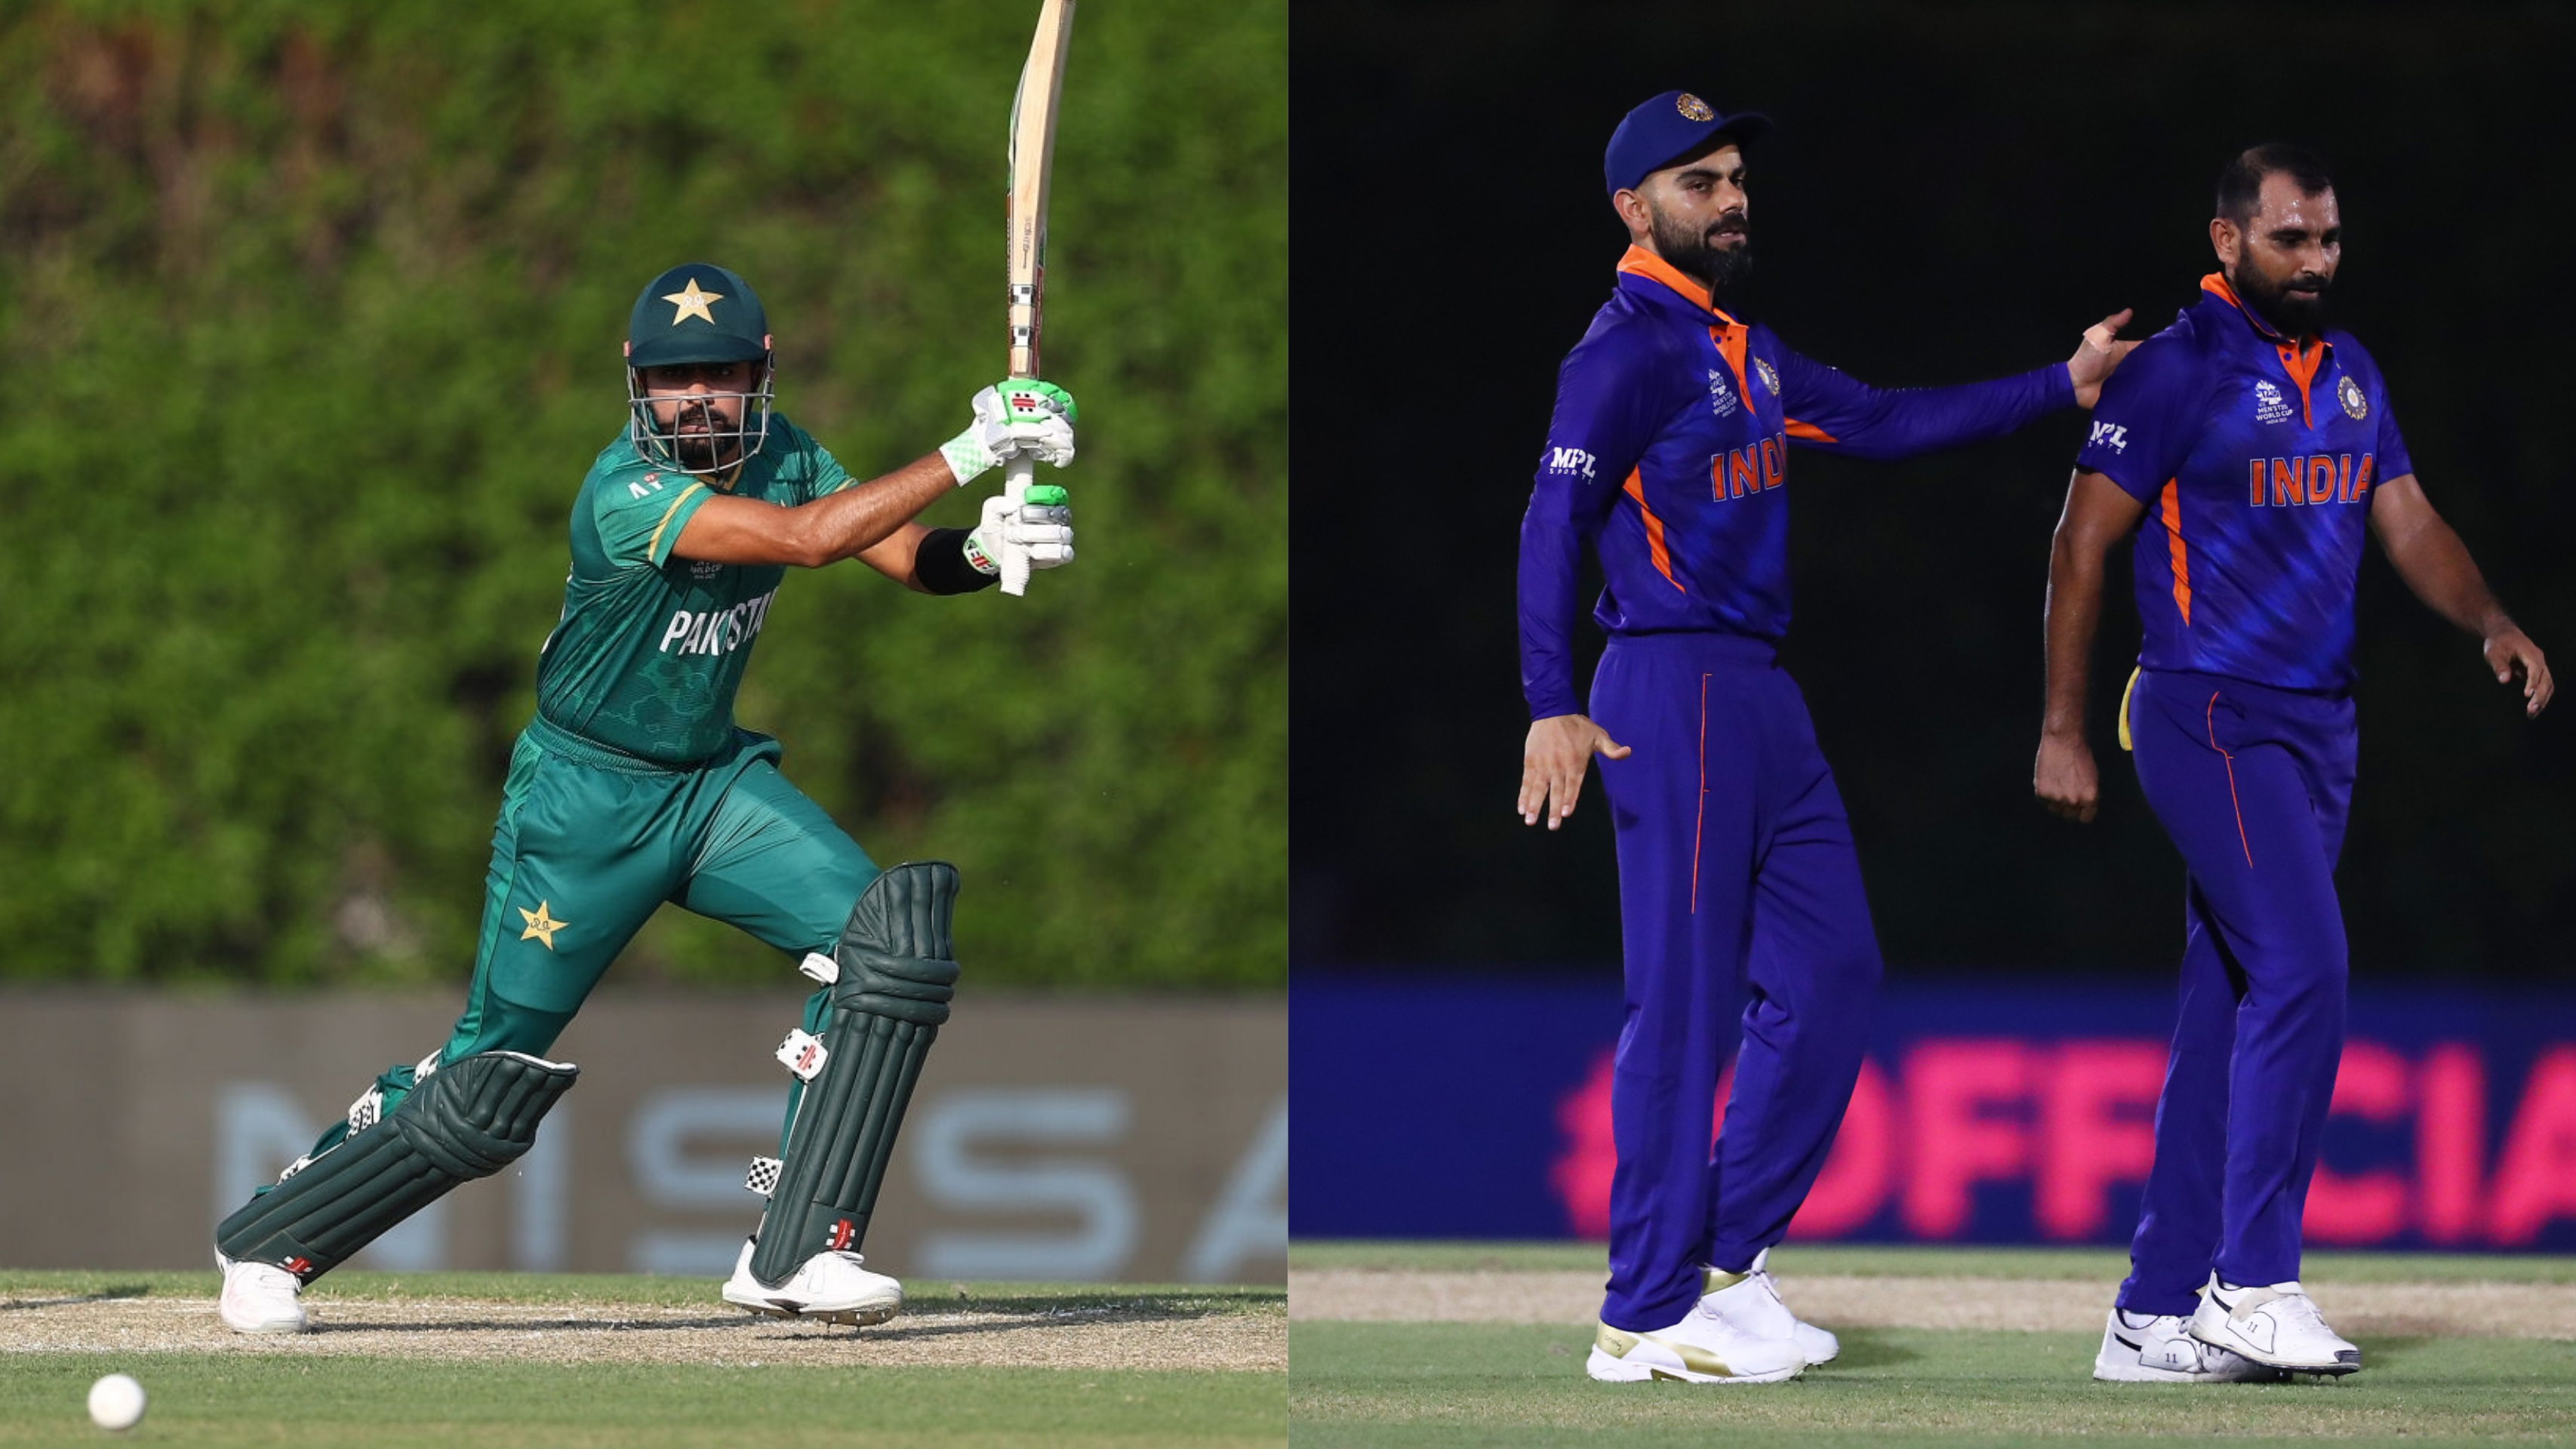 T20 World Cup 2021 | The India-Pakistan Super 12s clash is the final before the final, states Inzamam-ul-Haq